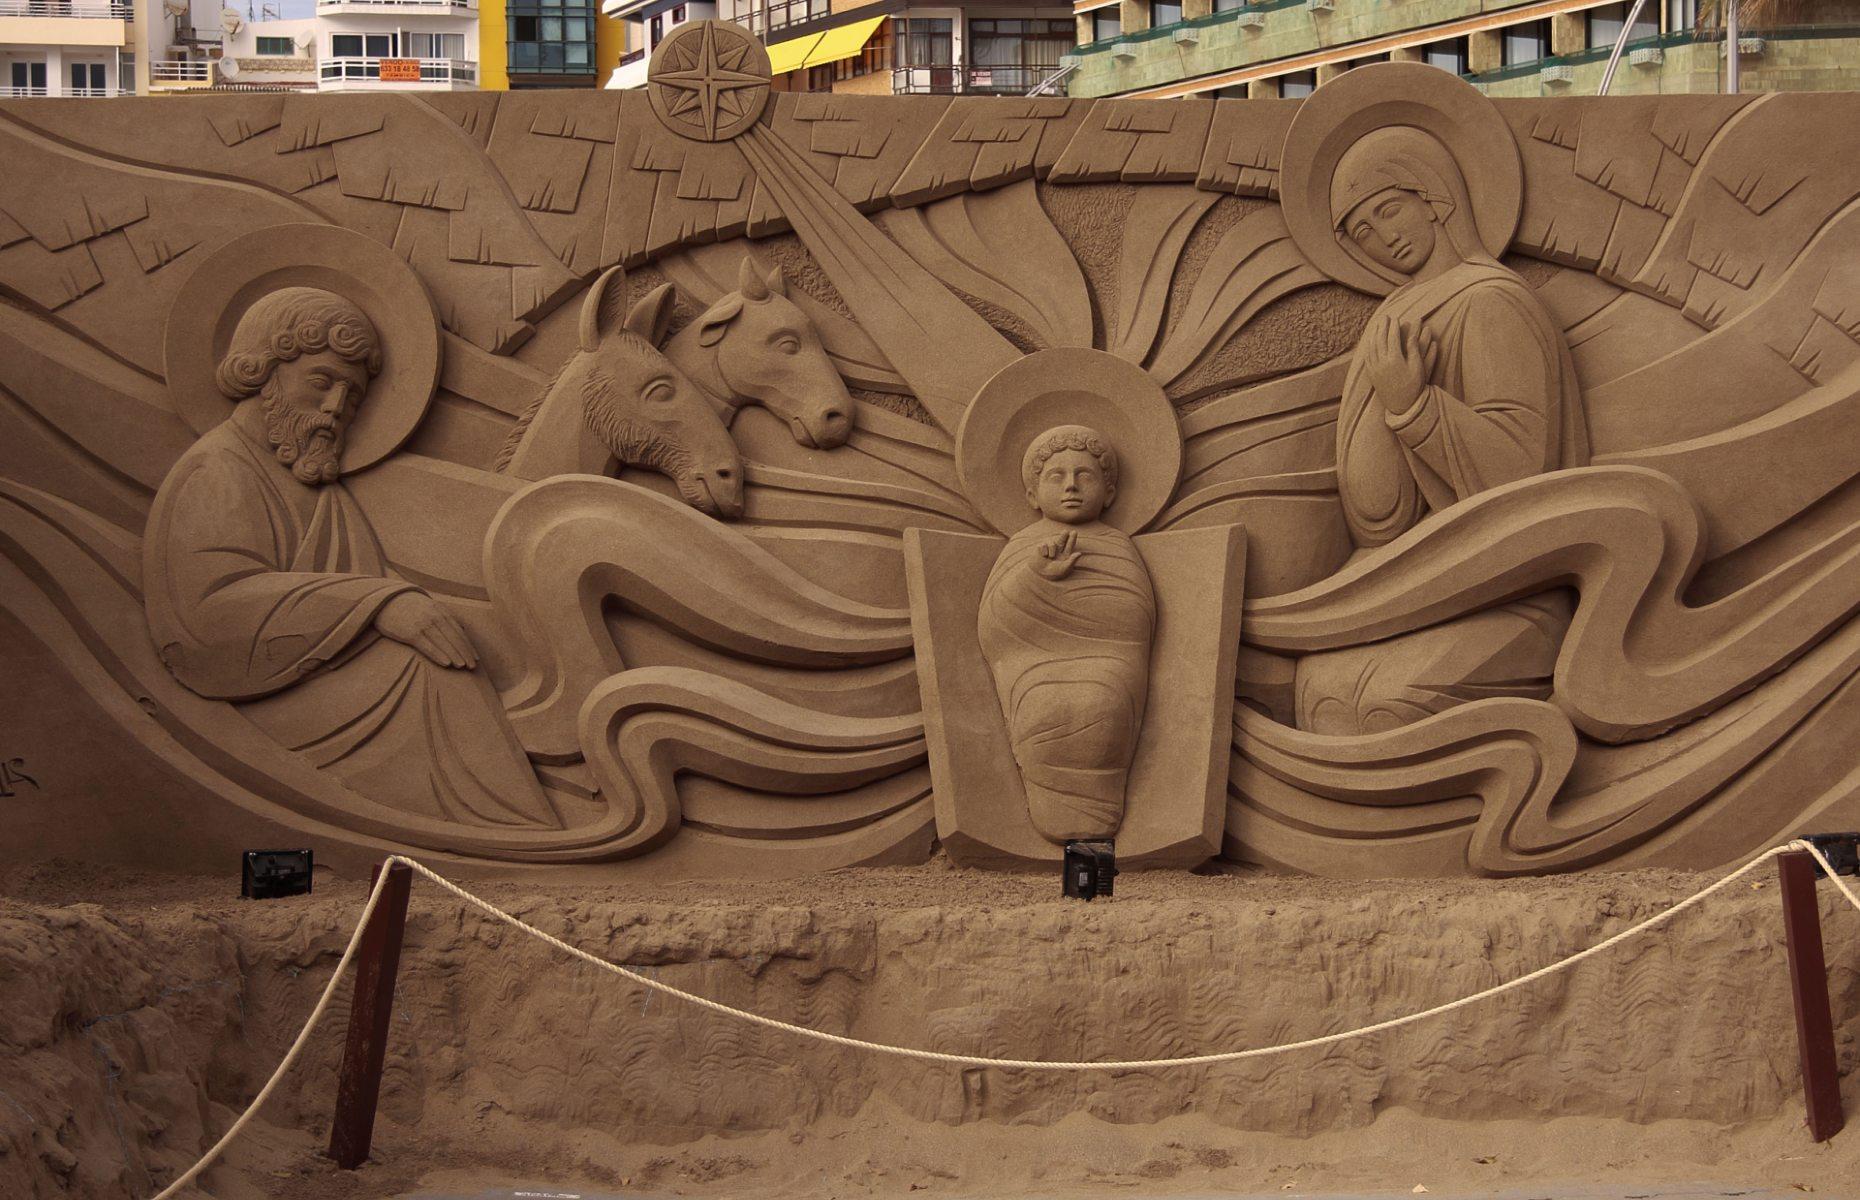 <p>Every year on the golden beach of Las Canteras, Gran Canaria, talented sand artists work tirelessly to create a spectacular nativity scene. The tradition, <a href="https://www.hellocanaryislands.com/experiences/the-incredible-nativity-scene-carved-out-of-sand-on-las-canteras-beach-in-gran-canaria/">which began in 2006</a>, attracts visitors from all over the world, with the sand sculptures usually being completed in early December and staying up until early January. Pictured is the sculpture from 2012.</p>